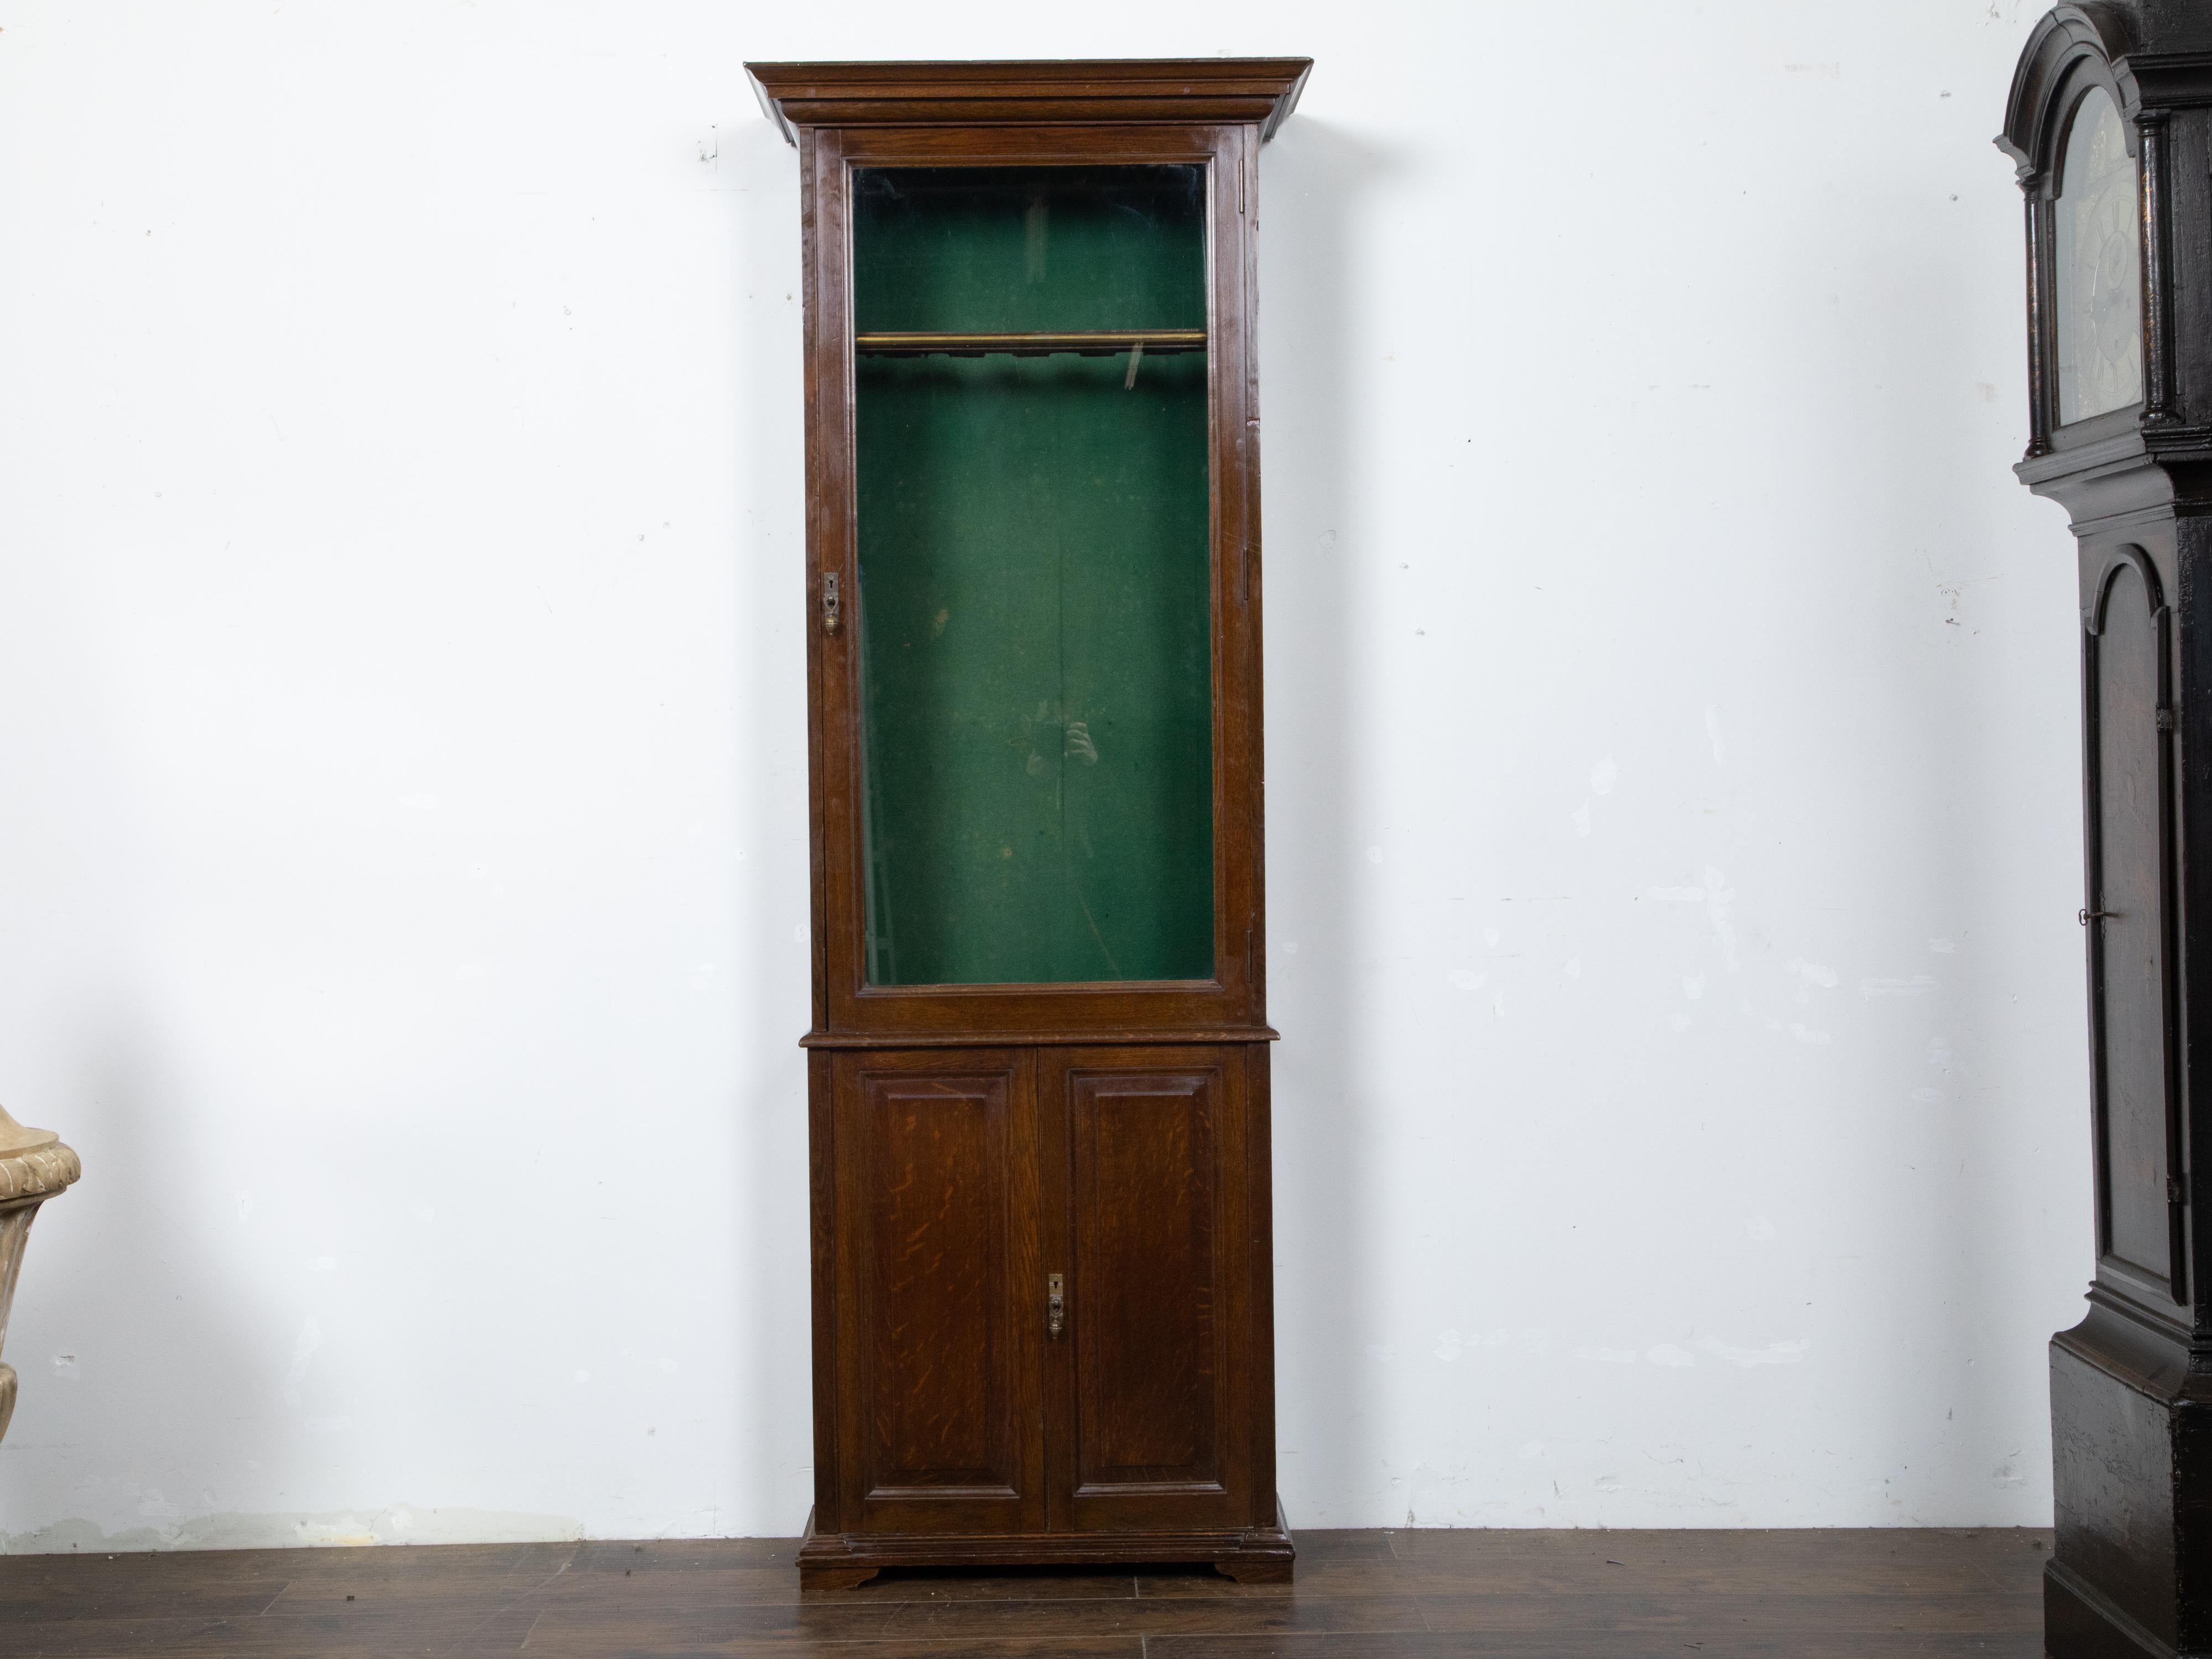 An English oak gun cabinet from the 19th century, with single glass door, felt interior, wooden doors and inner drawers. Created in England during the 19th century, this oak gun cabinet features a molded and beveled cornice overhanging a single